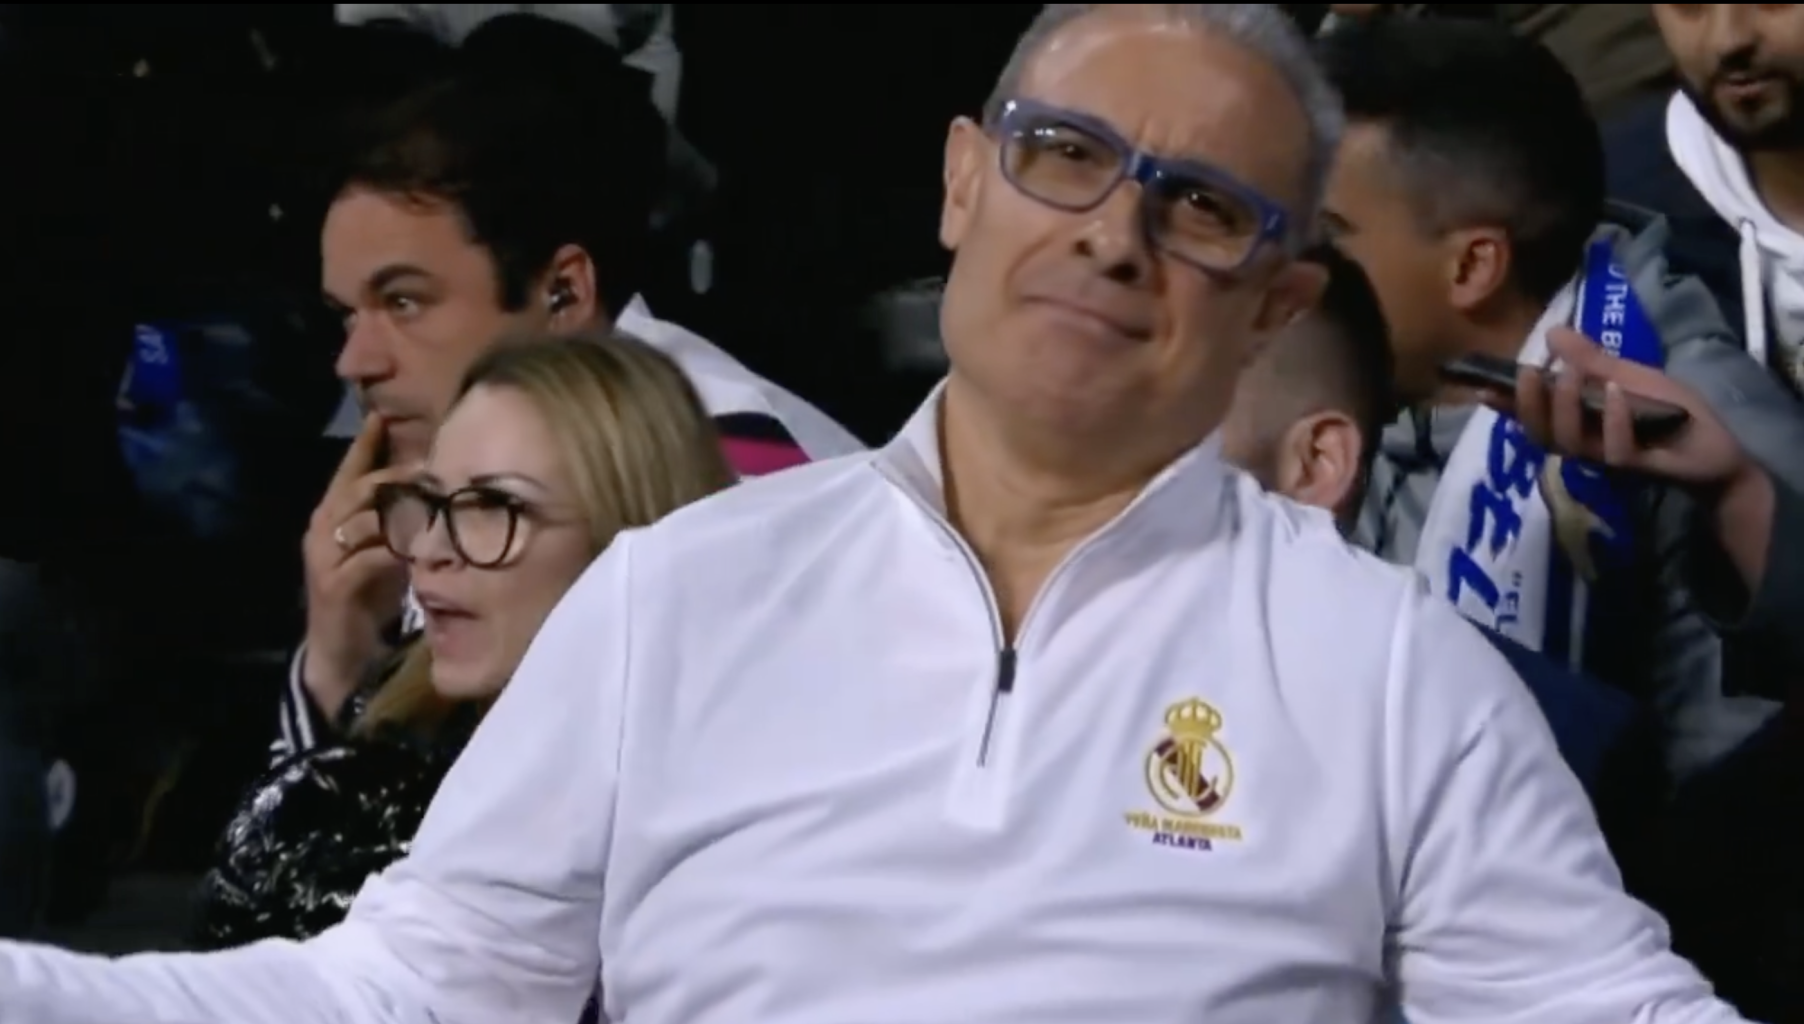 A Real Madrid fan in the Bernabeu reacting after Real Madrid conceded in the 2nd minute vs City